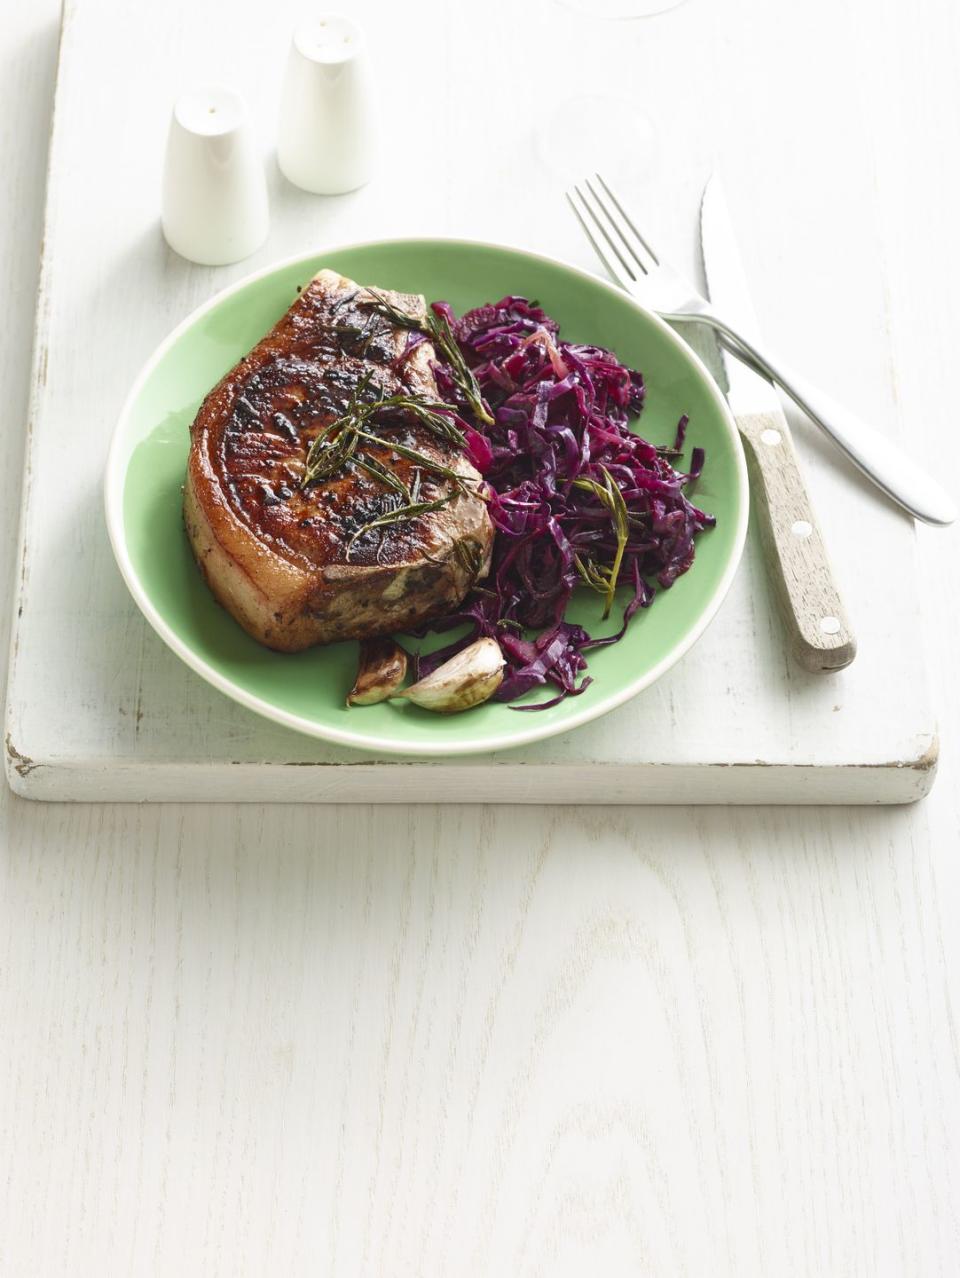 Rosemary Skillet Pork Chops with Quick Braised Cabbage